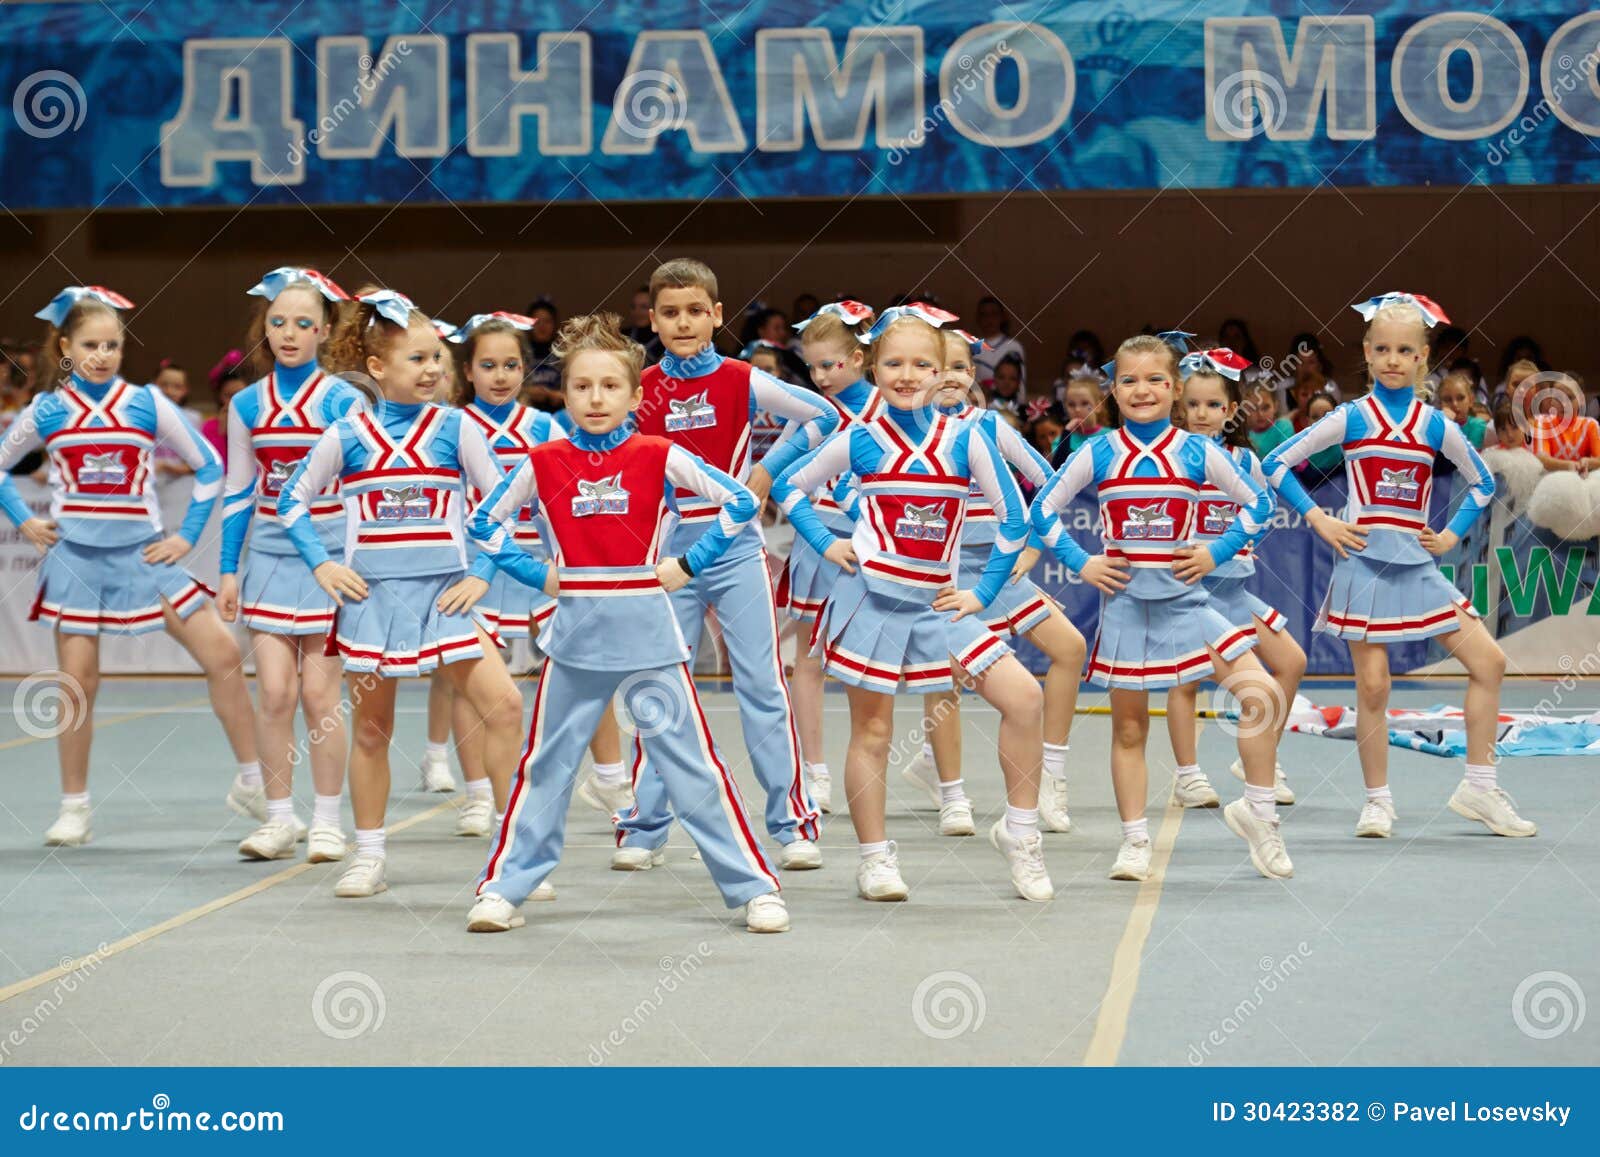 MOSCOW - MAR 24: Performance of children cheerleaders team Sharks at Championship and Contests of Moscow in cheerleading at Palace of Sports Dynamo, March 24, 2012, Moscow, Russia.